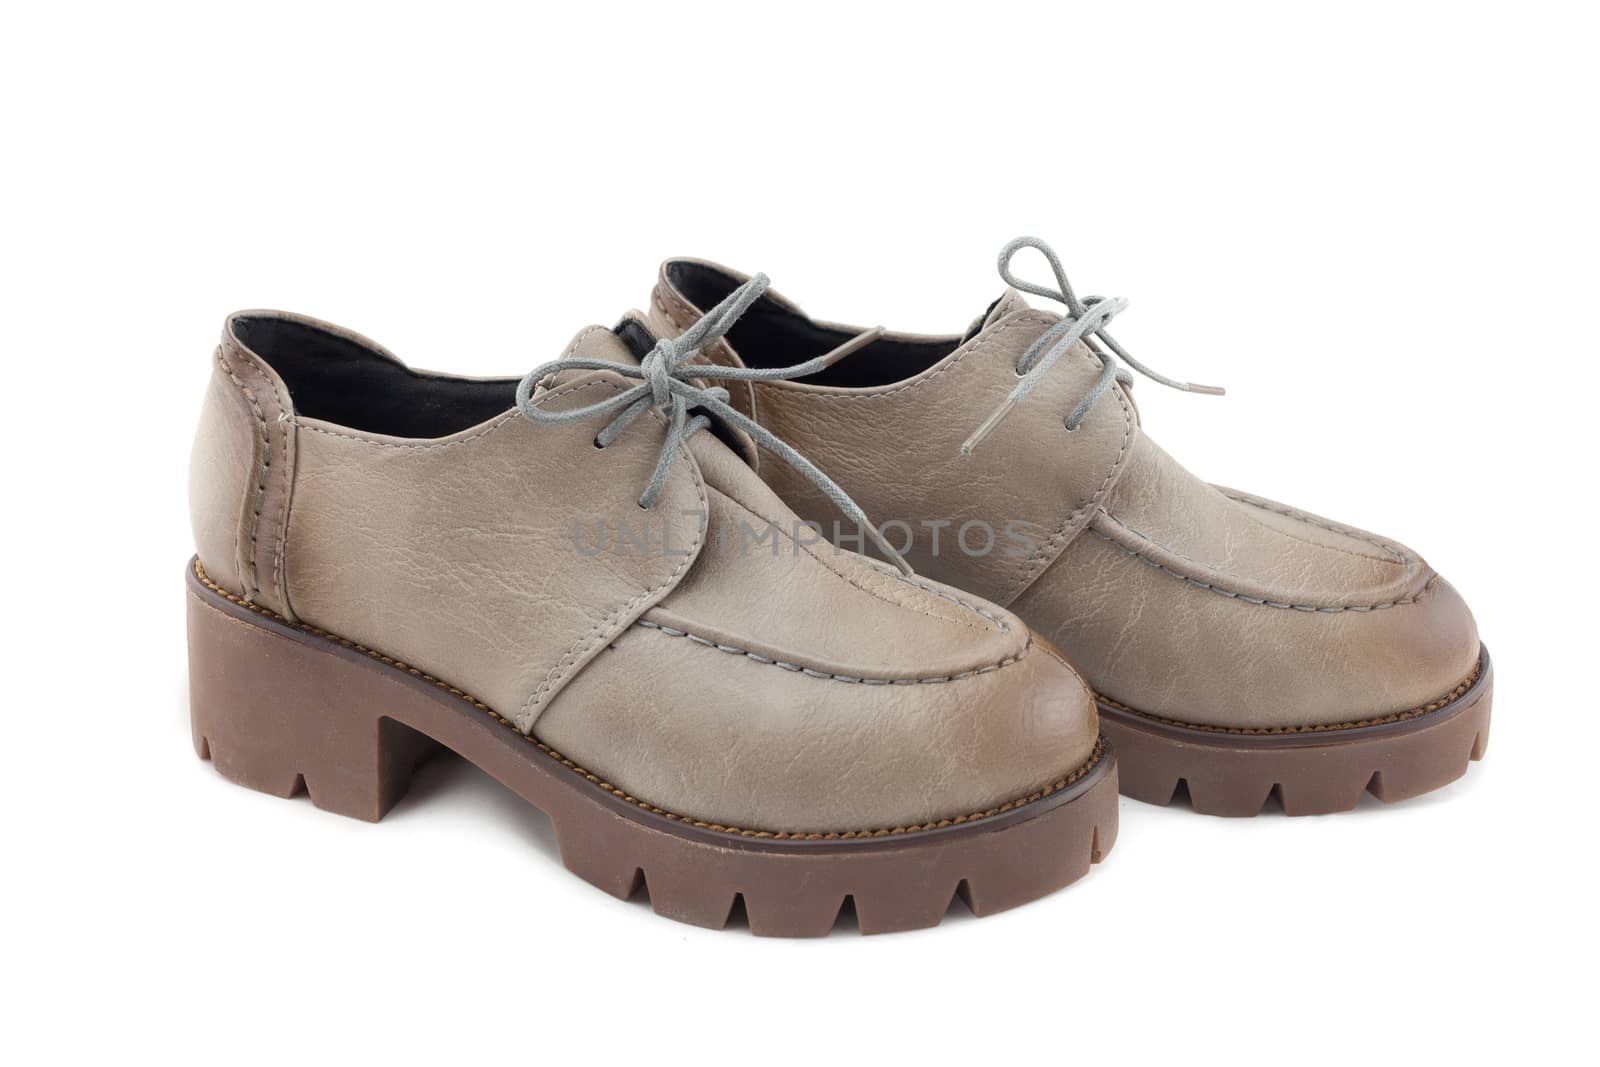 lady leather shoes with shoelace gradient bown on white background.